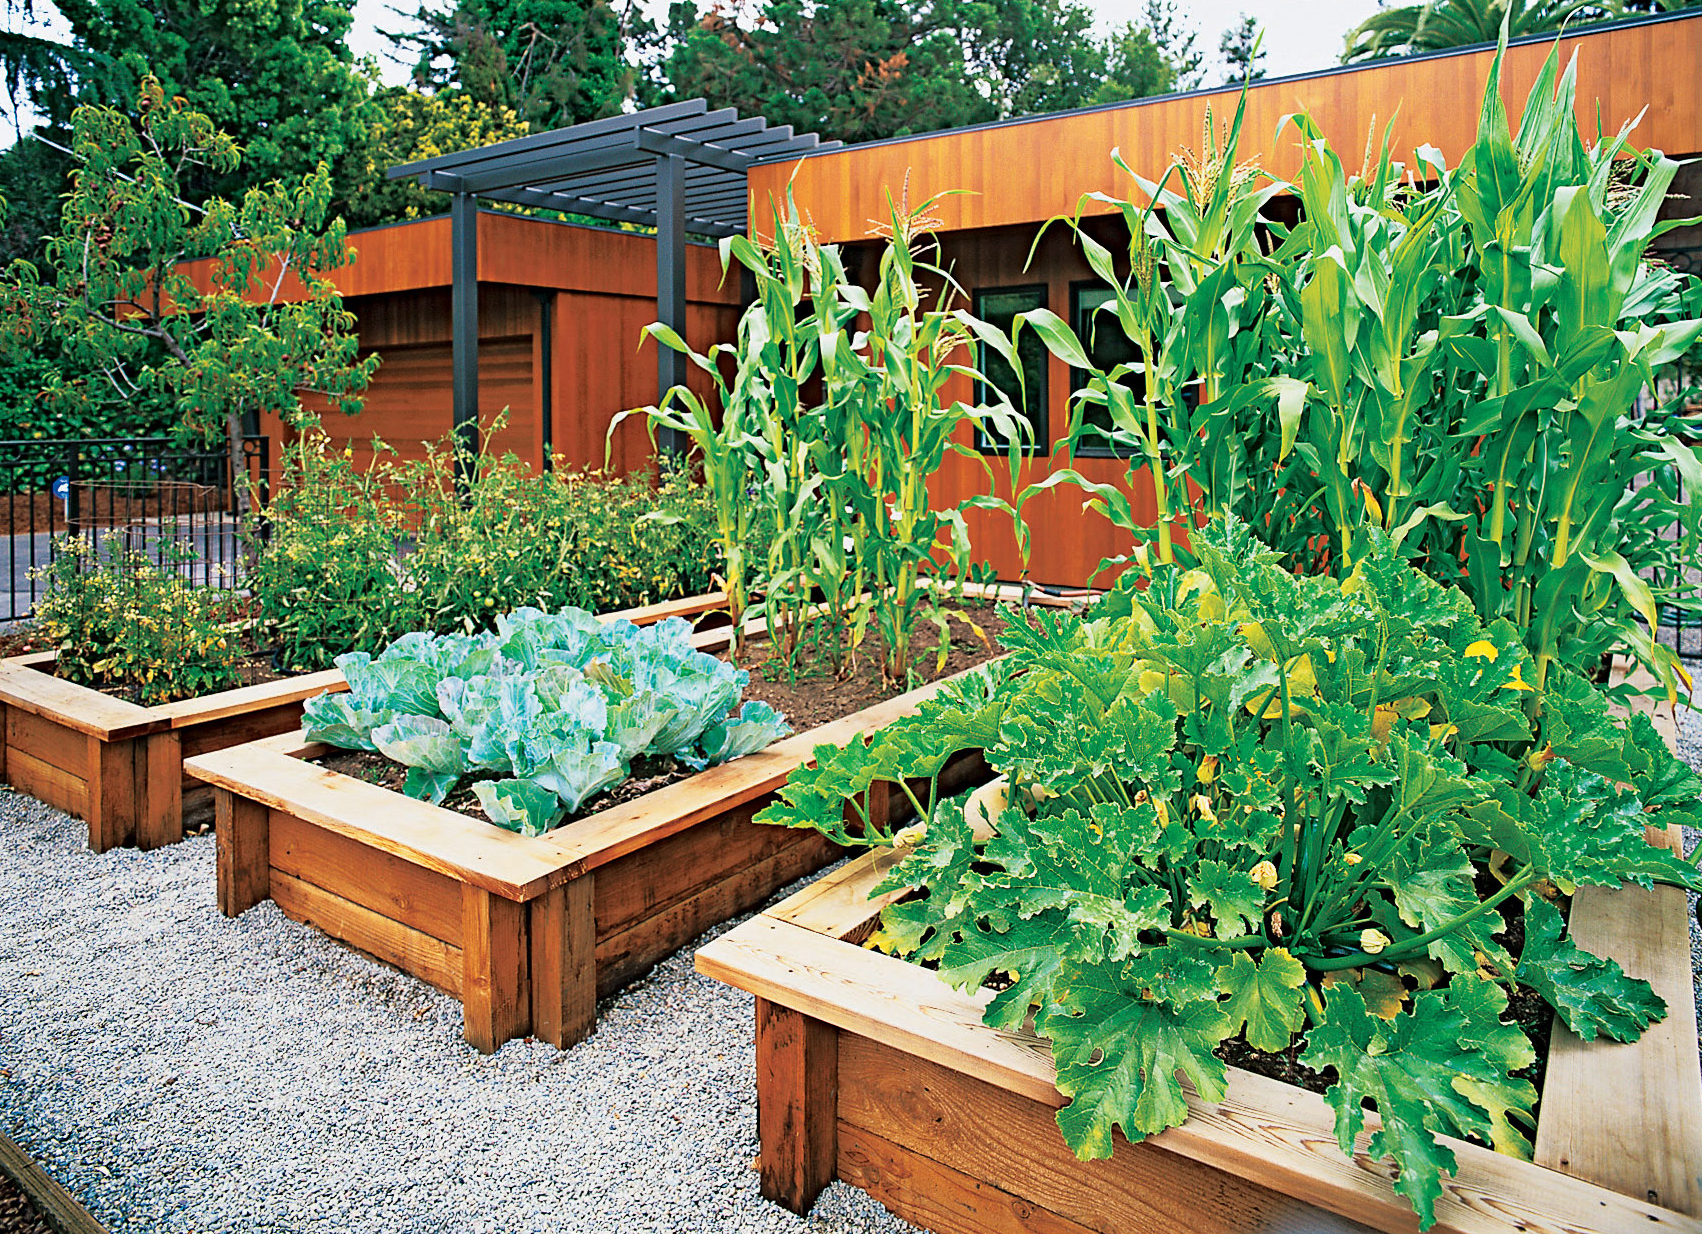 Grow Vegetables in the Front Yard - Sunset Magazine